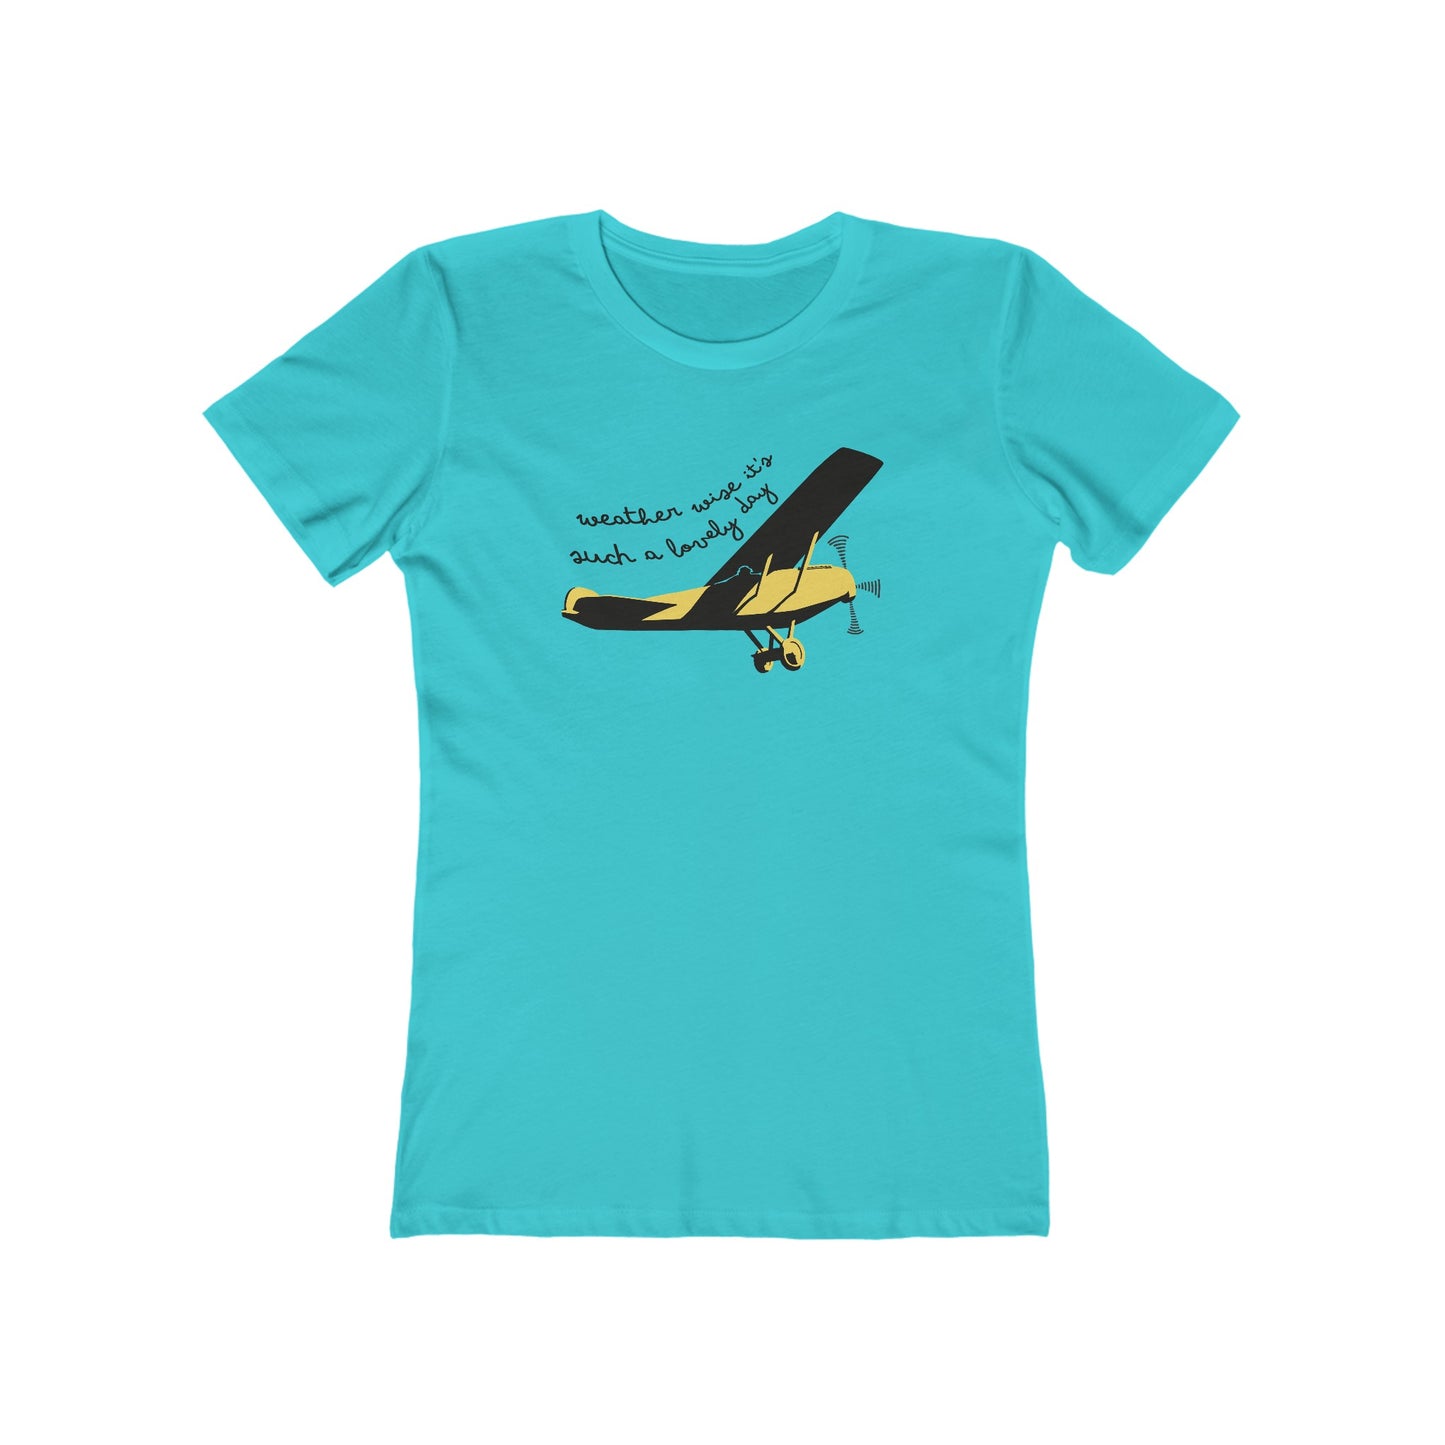 Come Fly With Me - Women's T-Shirt